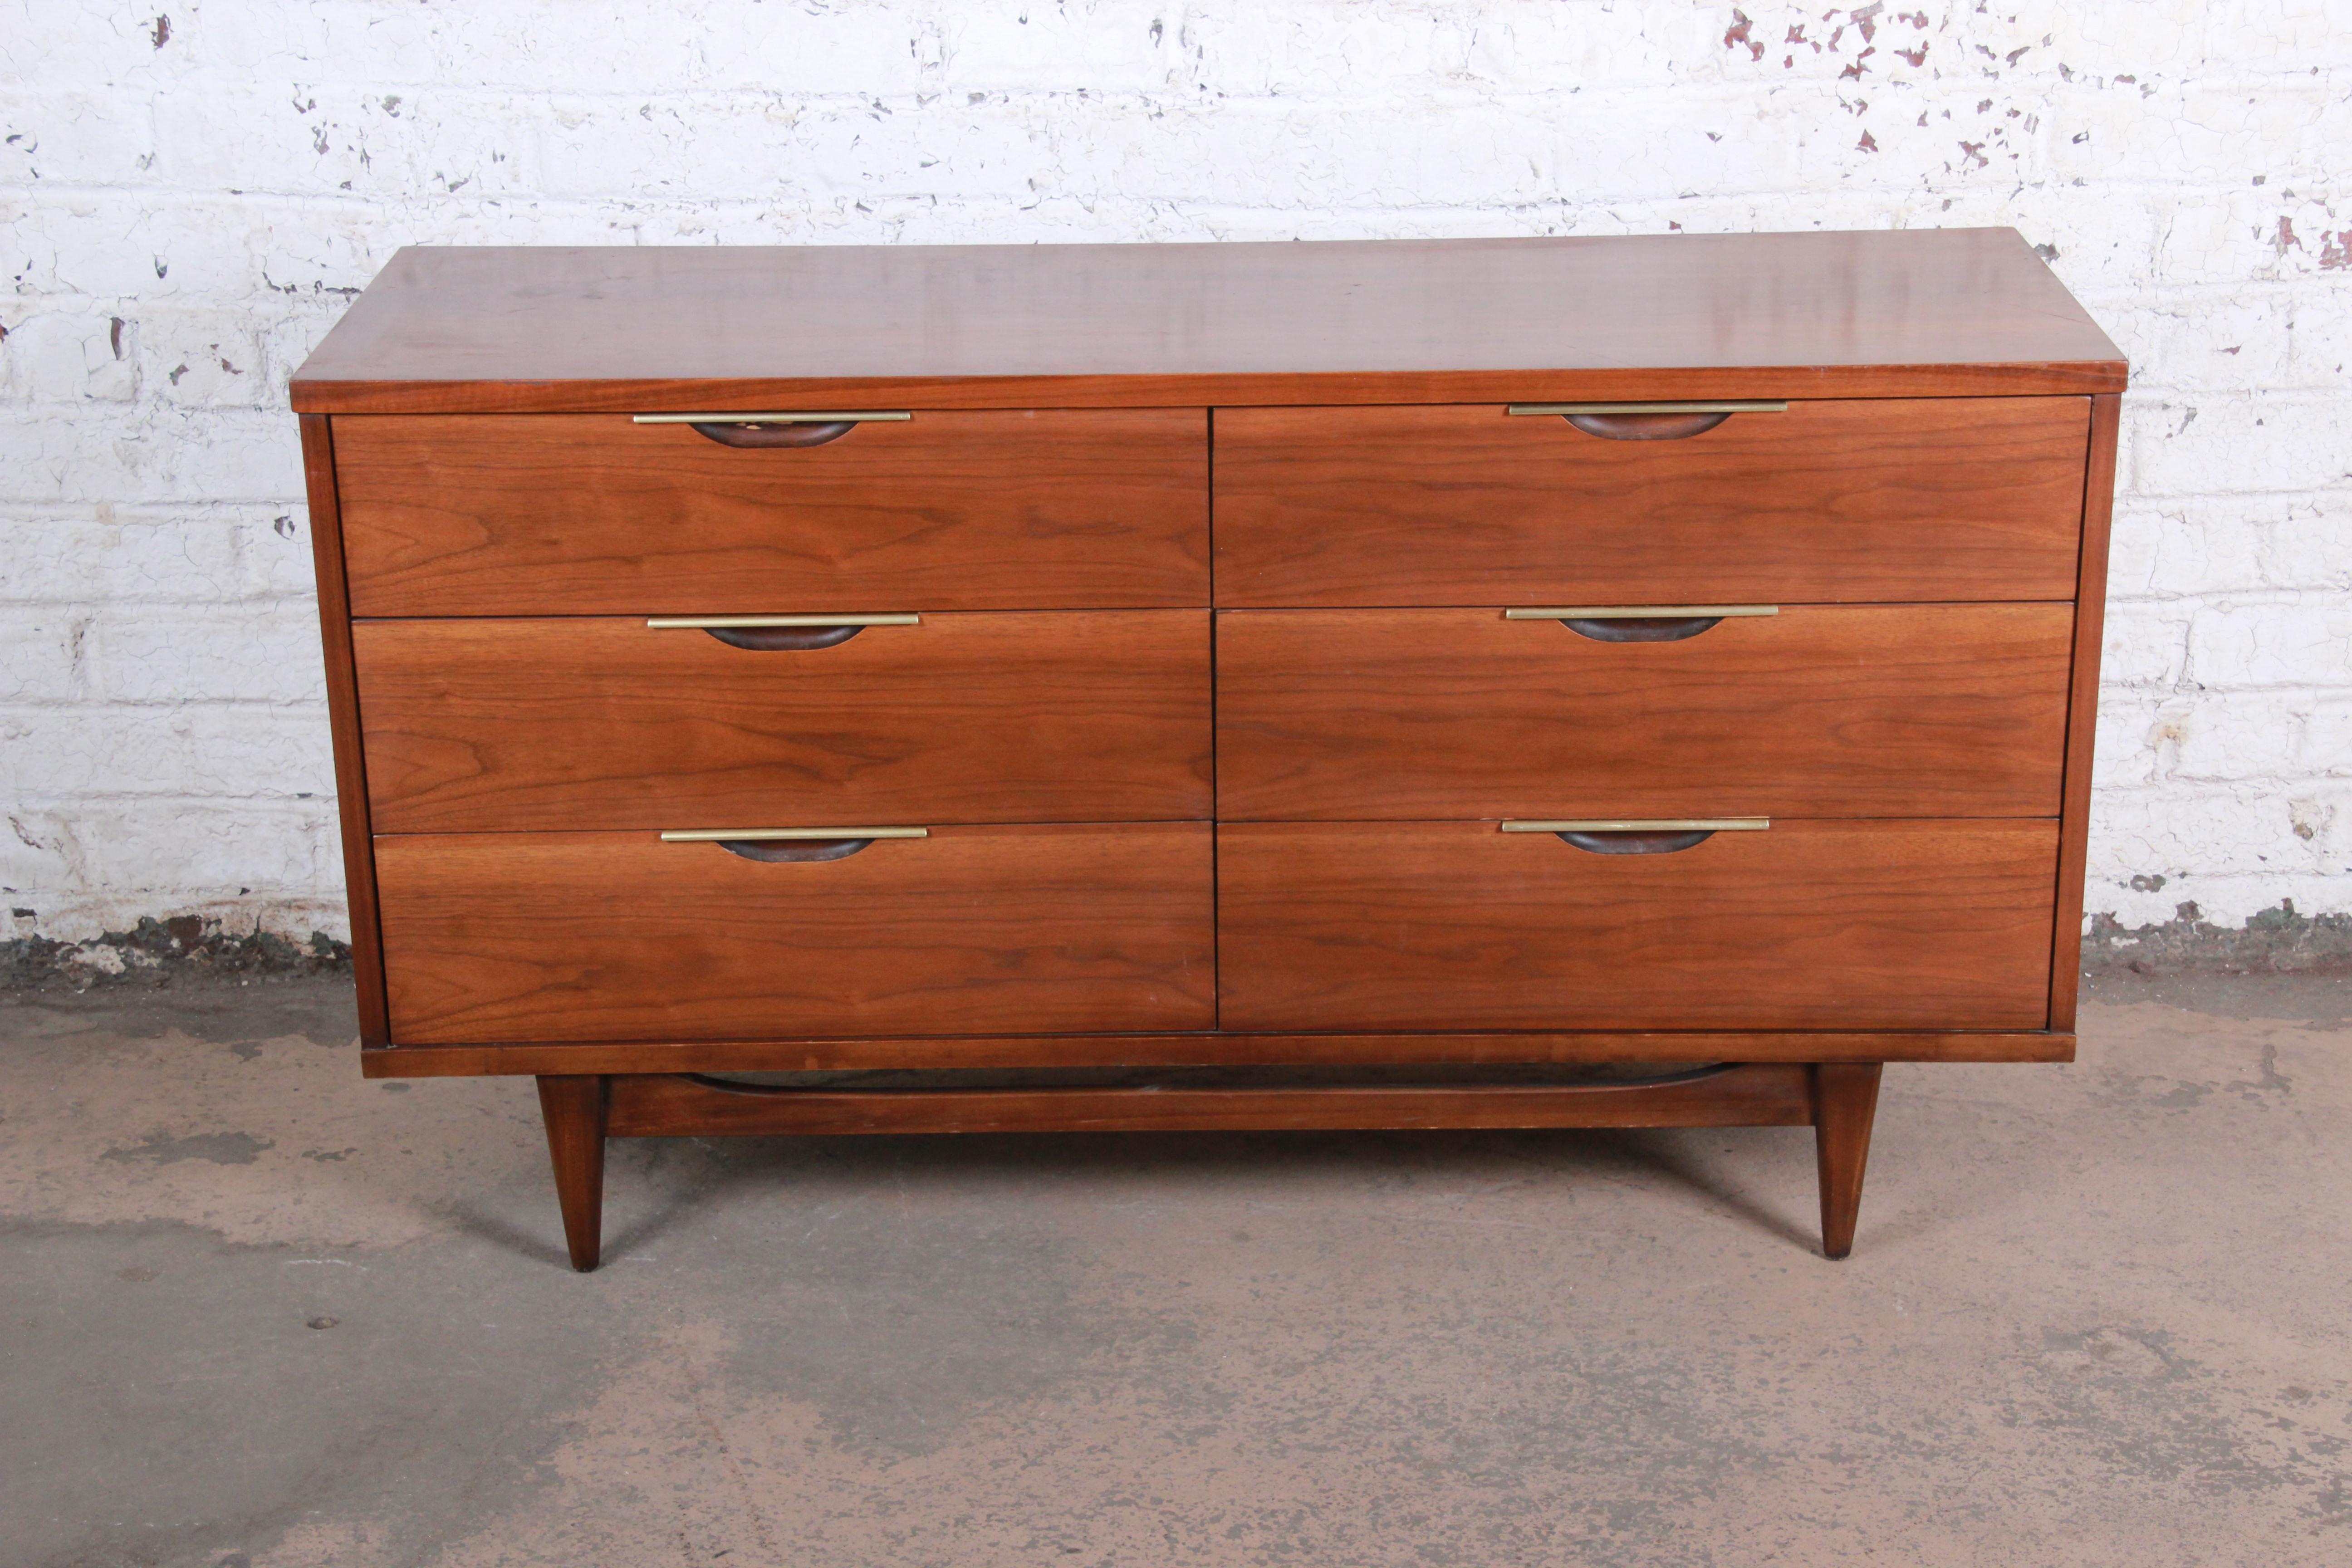 A stunning Mid-Century Modern long dresser or credenza from 